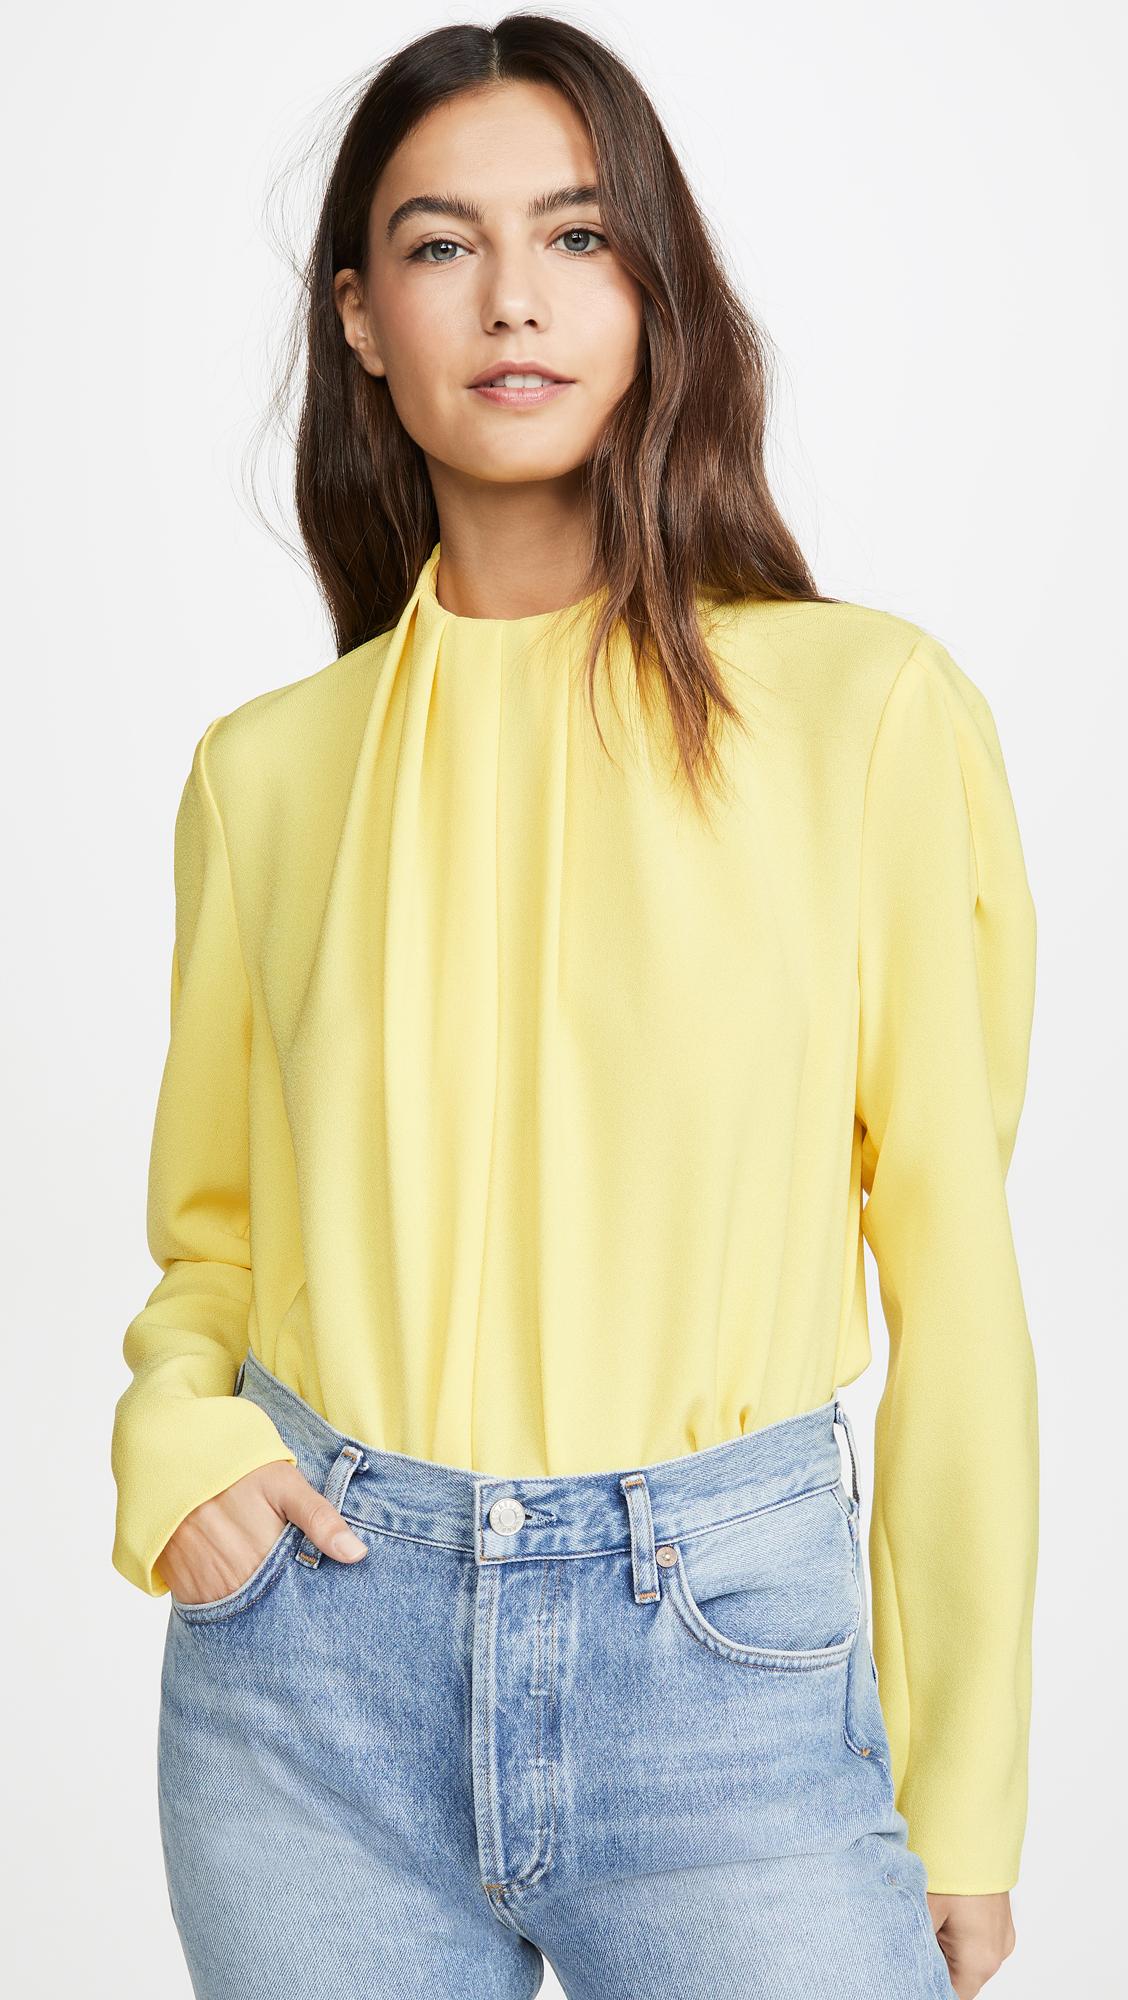 Tibi Synthetic Shirred High Neck Top in Lime Yellow (Yellow) - Lyst